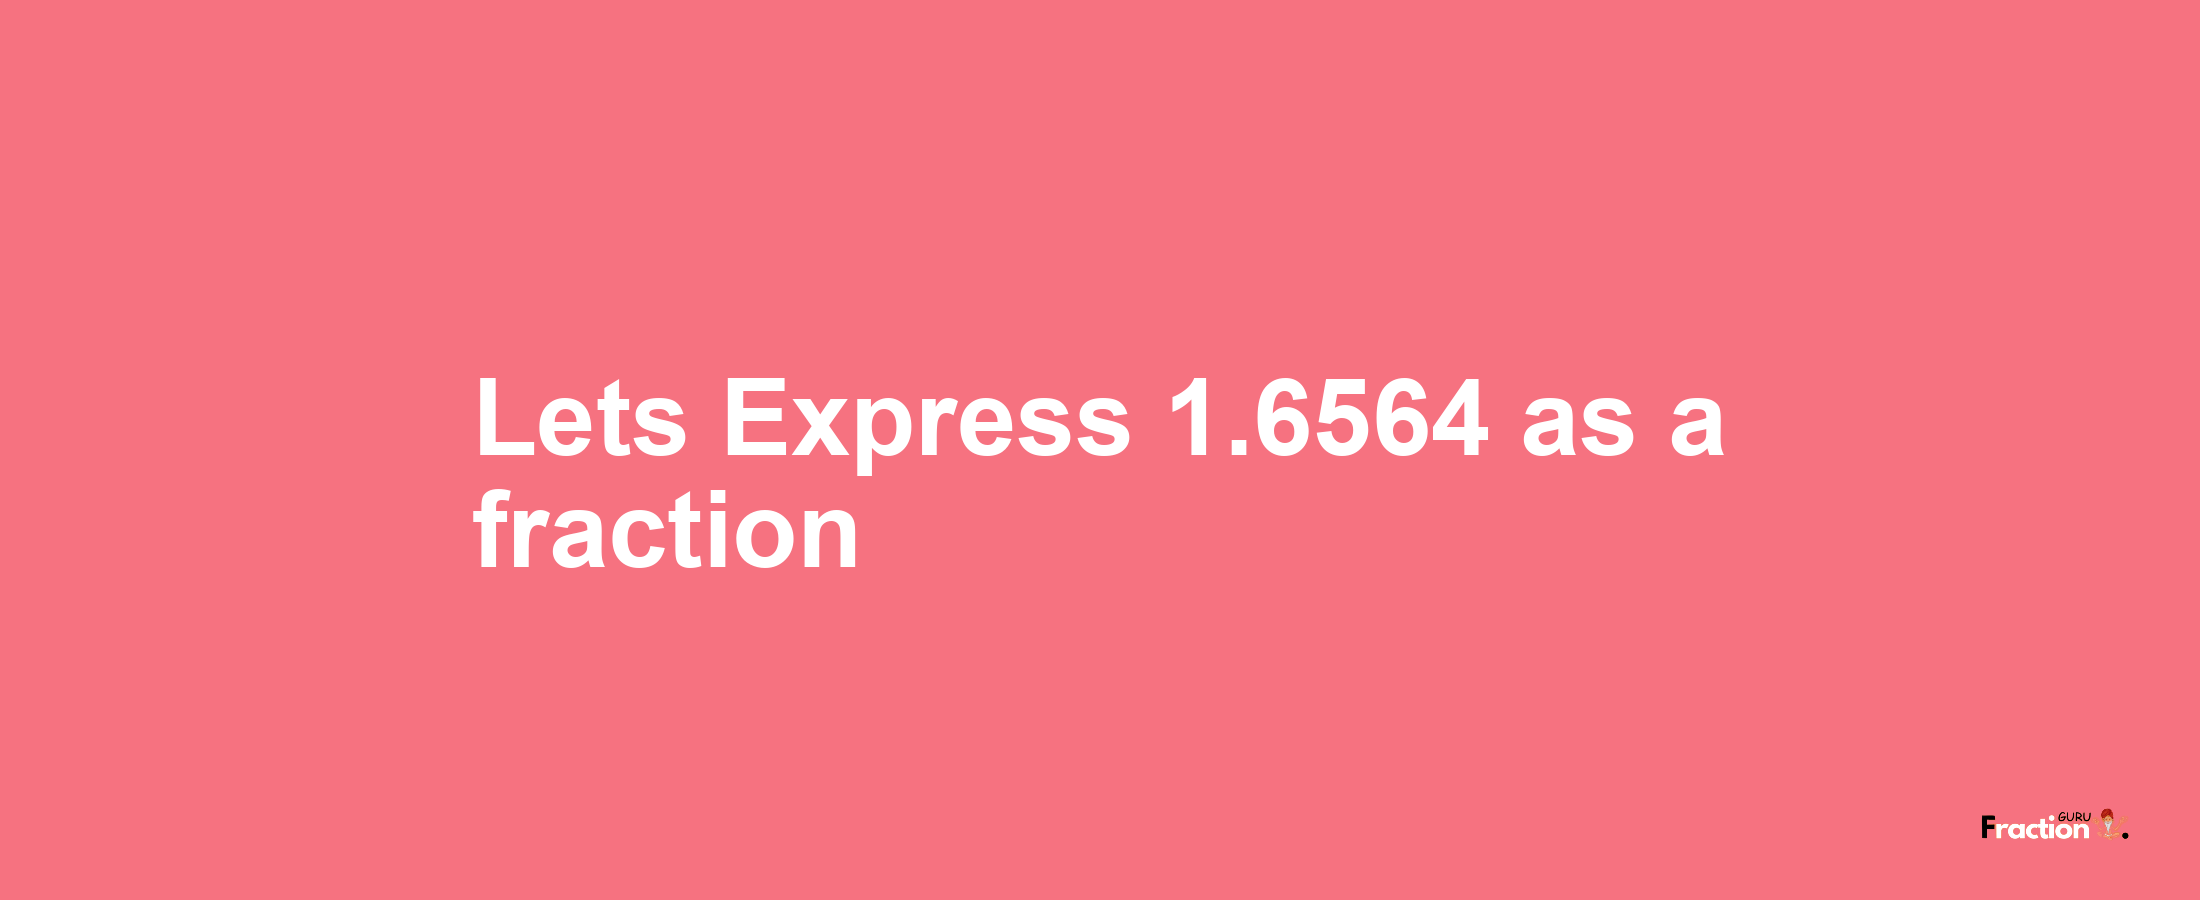 Lets Express 1.6564 as afraction